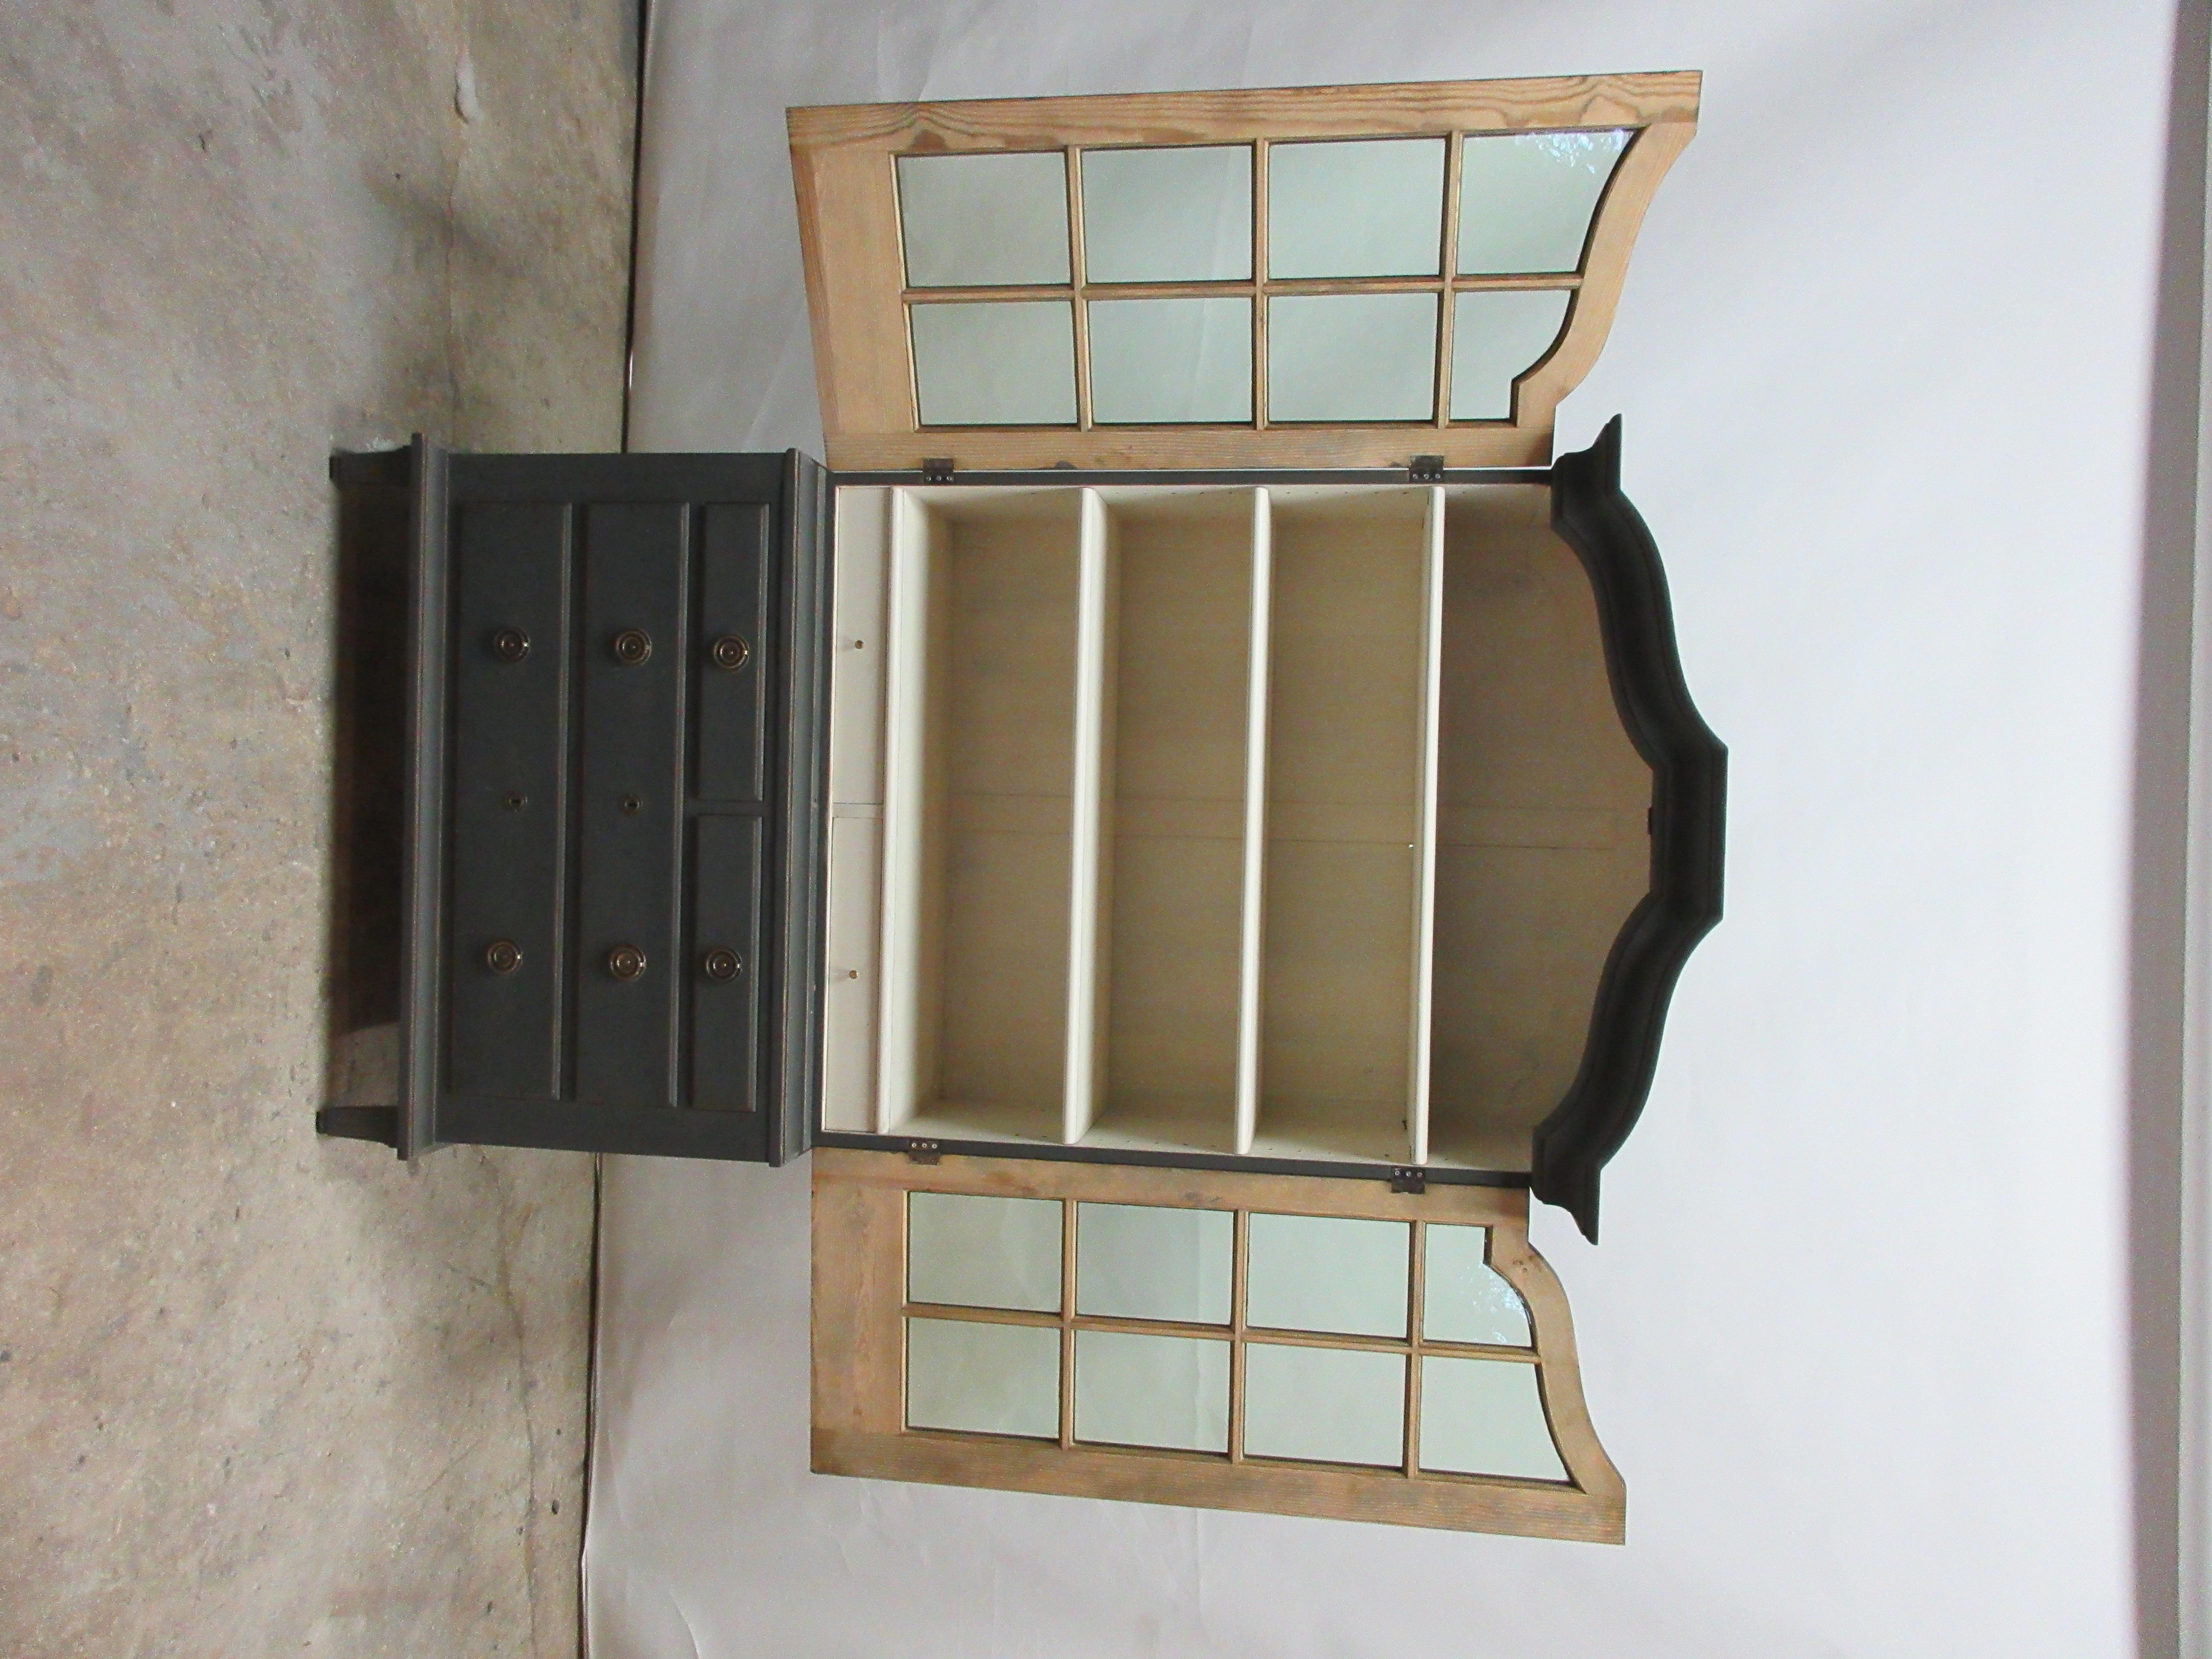 This is a Swedish 2-door glass top hutch, it comes apart in 2 pieces and is very easy to move. It was found at a auction in Stockholm, Sweden.